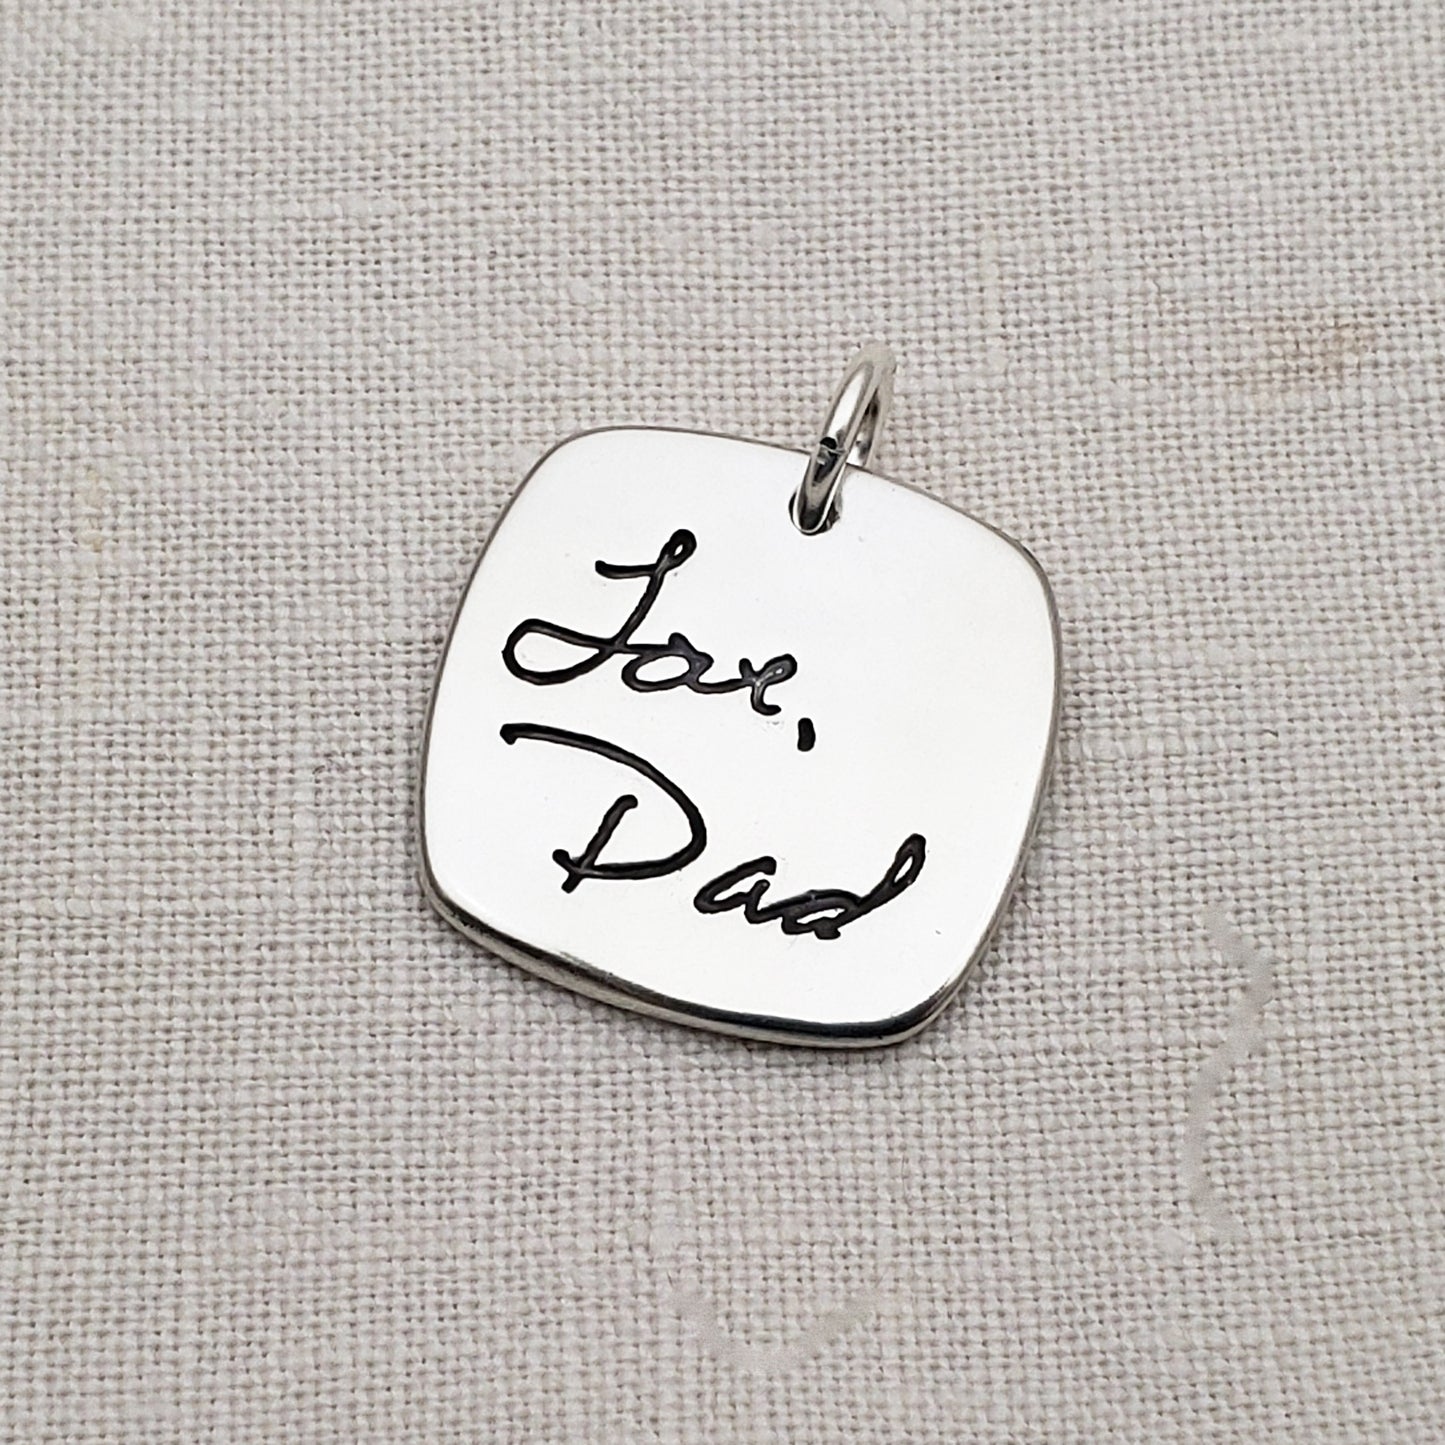 Handwriting Rounded Square Pendant